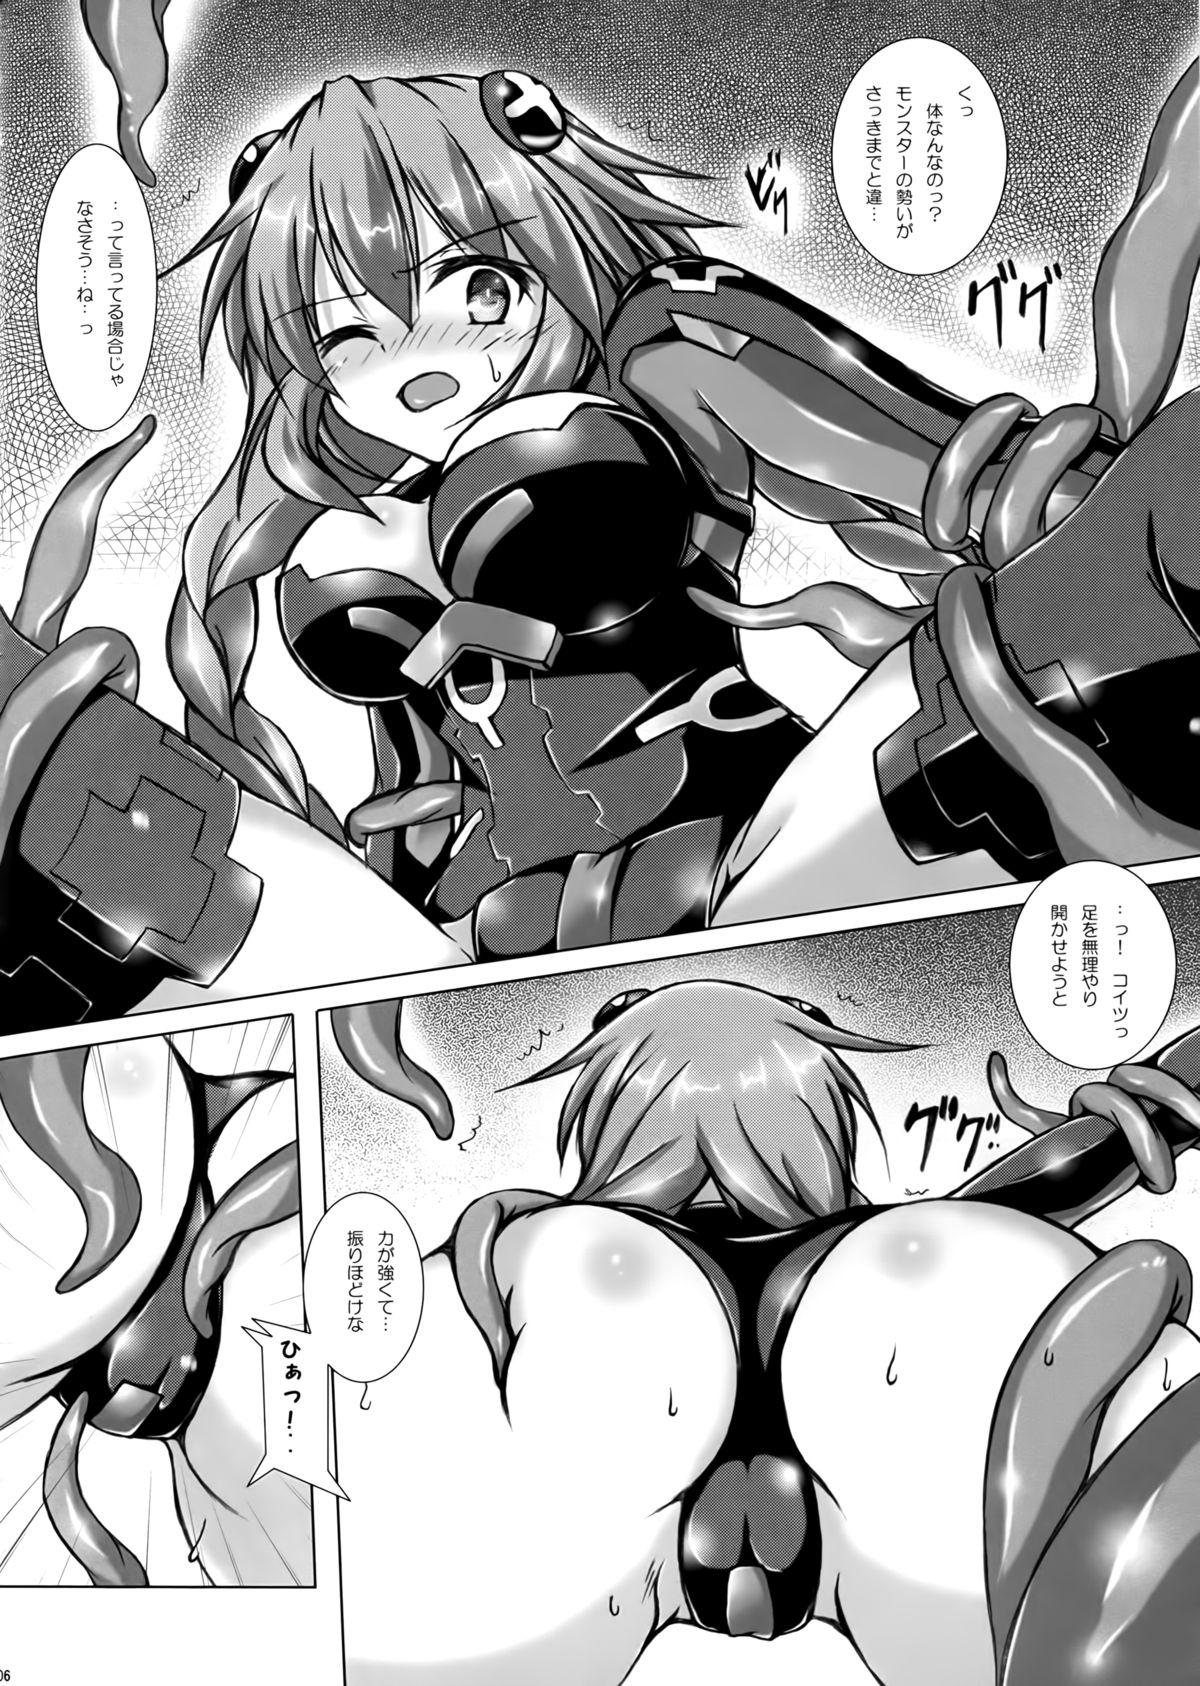 Girls Tentacle Syndrome - Hyperdimension neptunia Step Fantasy - Page 6